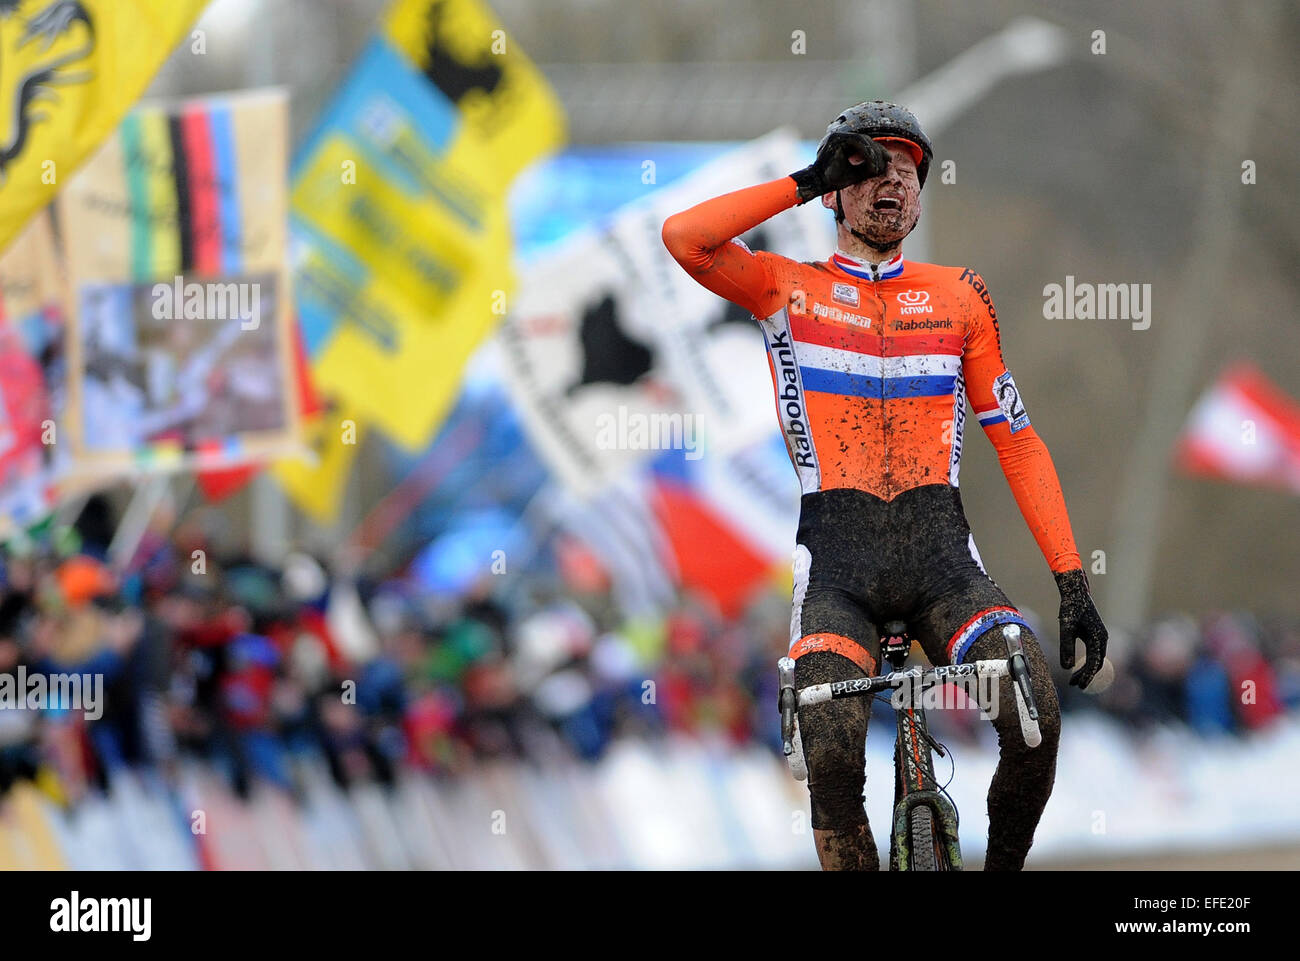 Mathieu van der Poel of Netherlands crosses the finish line as he wins the  cyclo-cross World Championship in Tabor, 93 kilometres (58 miles) South of  Prague, Czech Republic on Sunday, February 1,